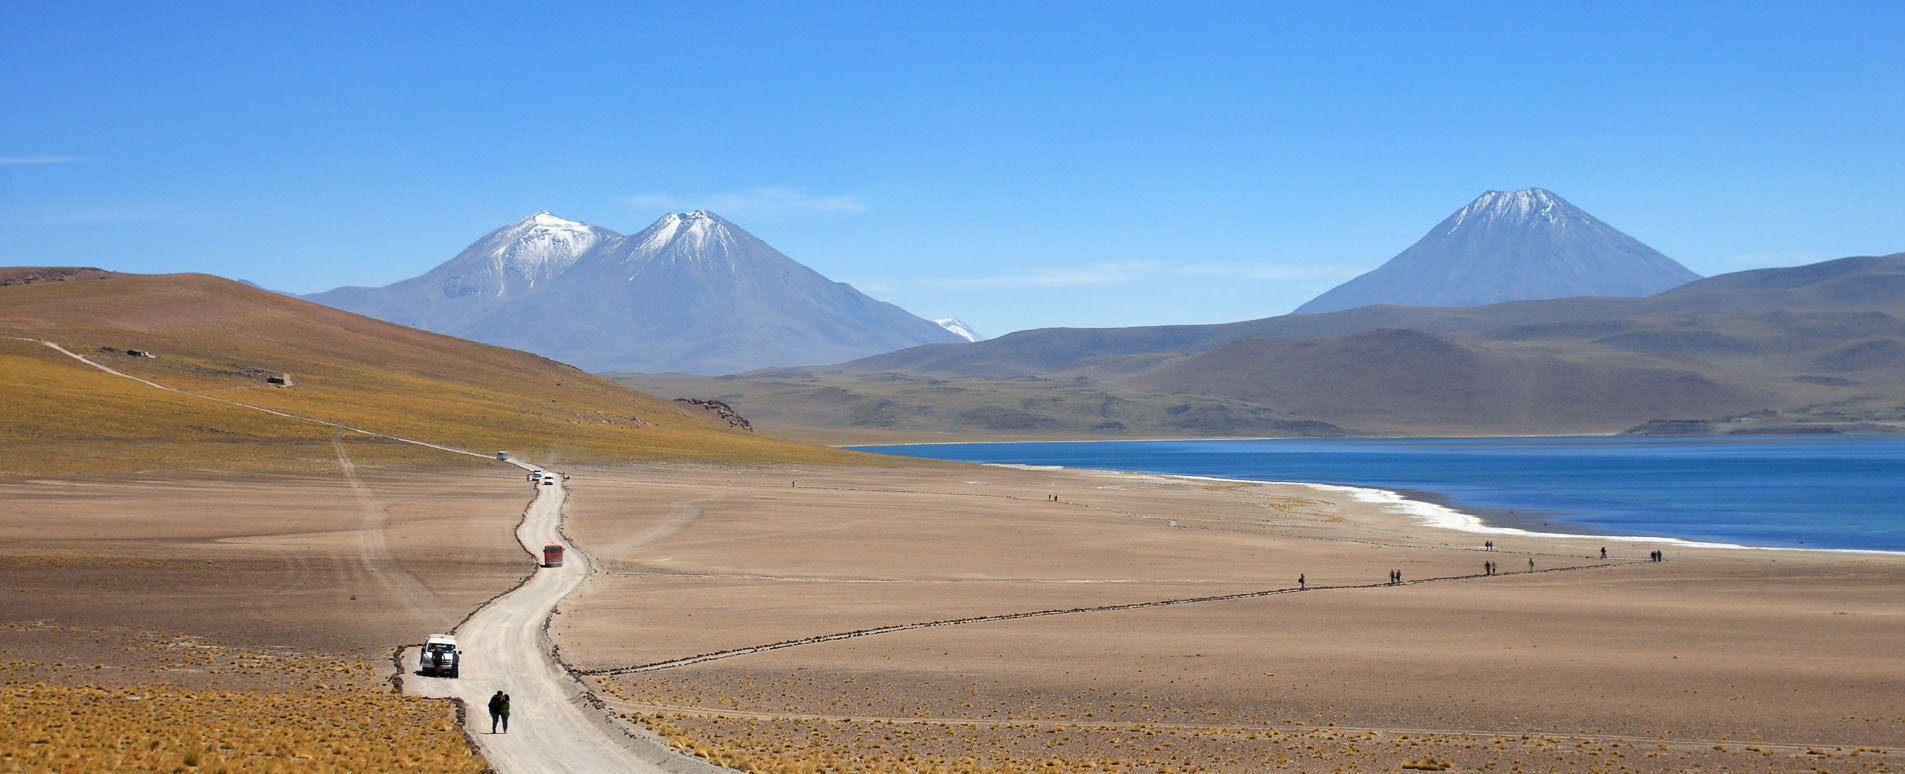 Chile serves as an example of Latin America's commitment to renewable energy and self-reliance. (Photo Internet reproduction)